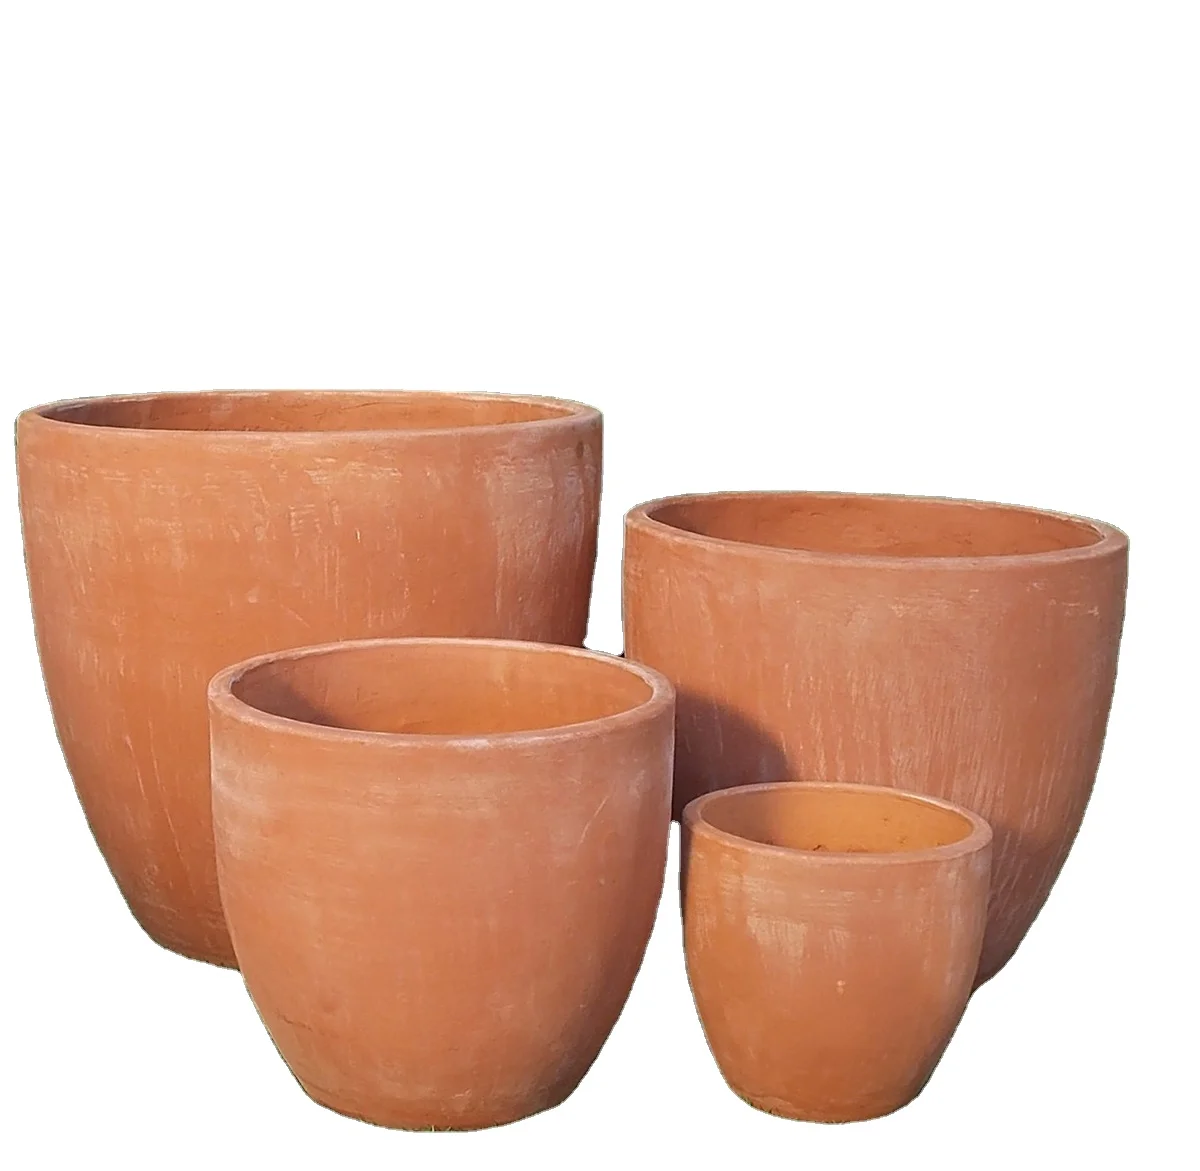 Medium Terracotta Pot for Indoor Outdoor Plants Christmas European Design Style New Year's Watering Pot Wholesale Use for Floors